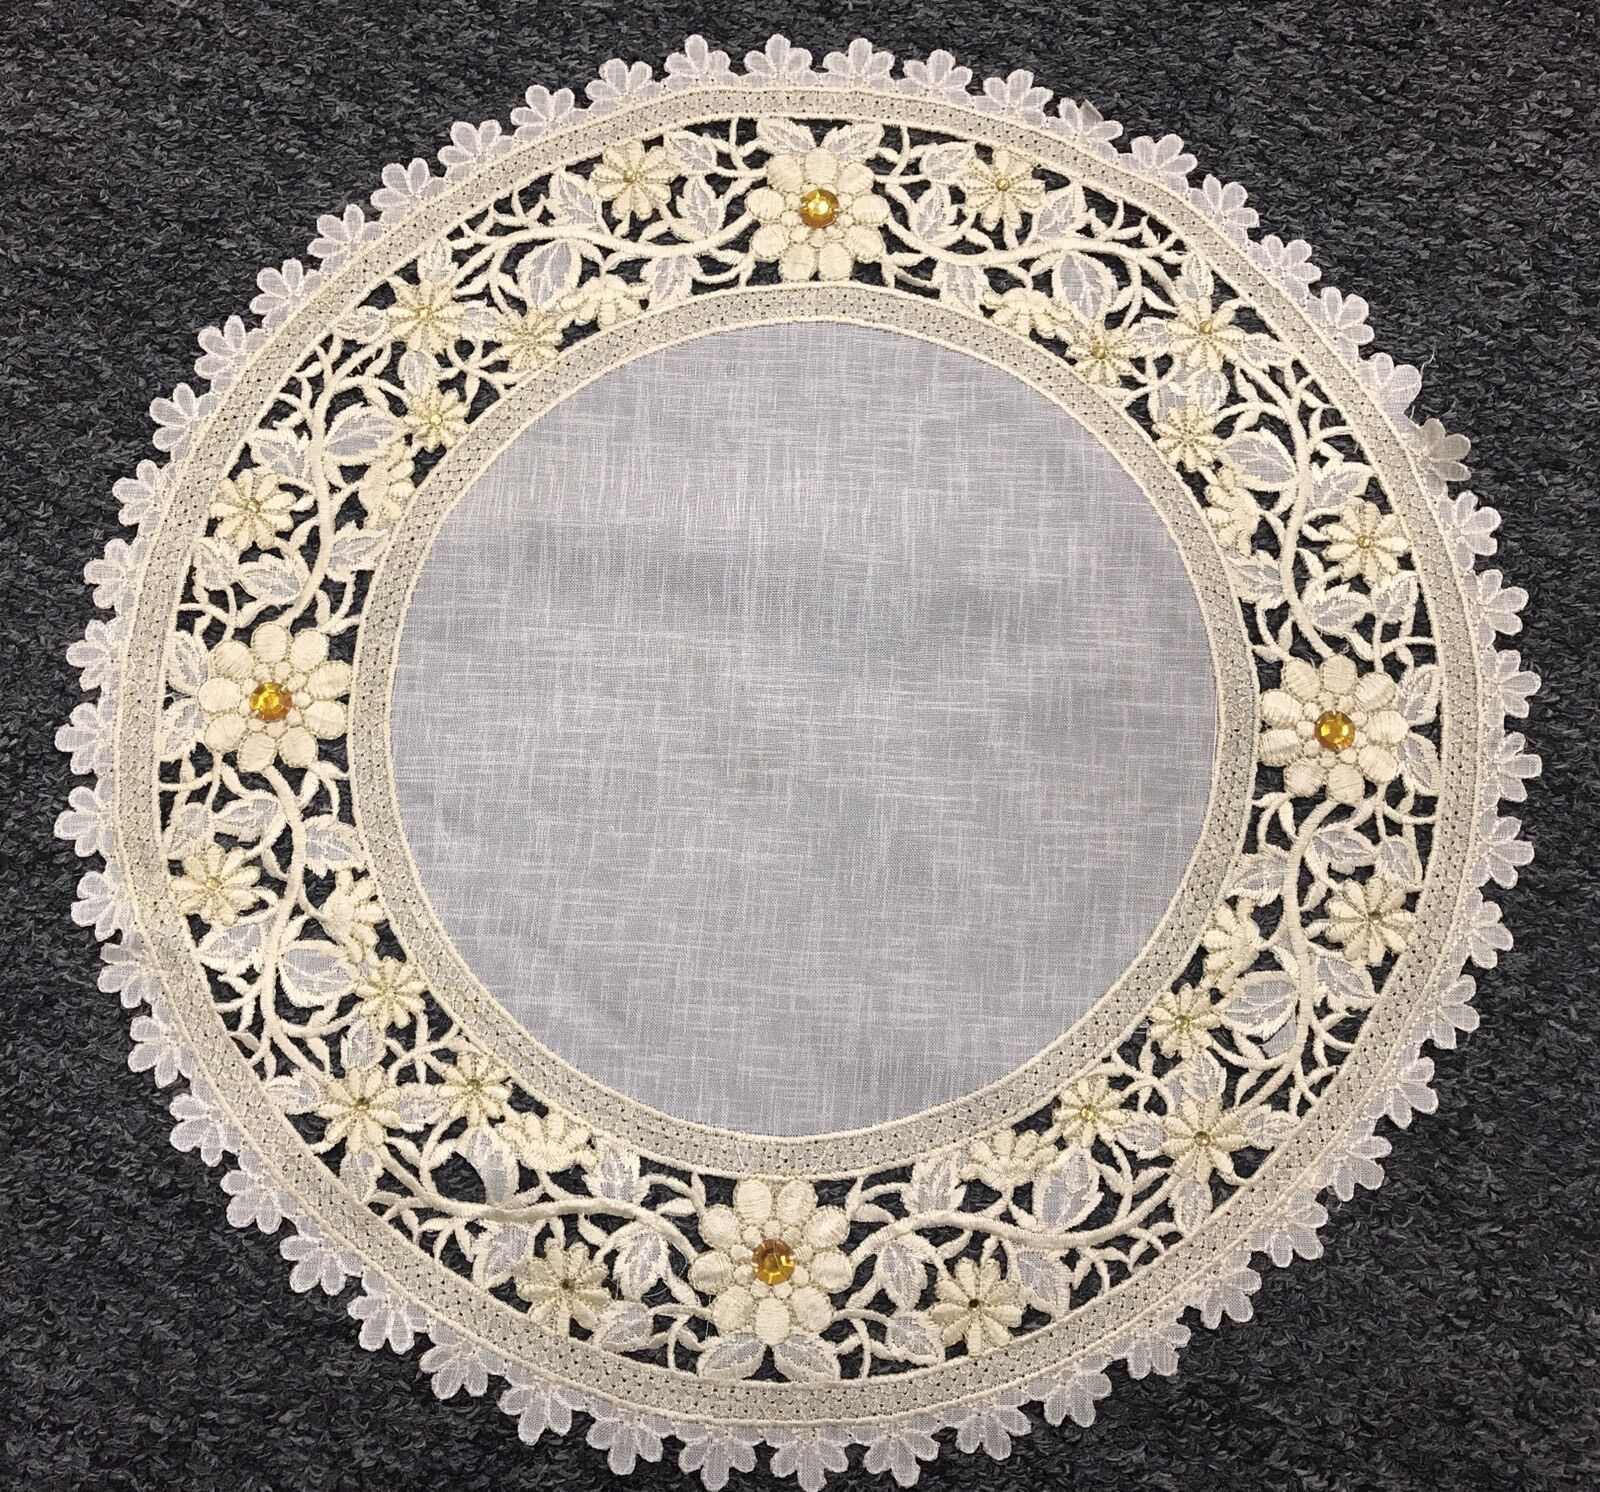 20“ Round Organza Embroidered Lace Rhine Stone Doily Doilies Gold Wedding Decor